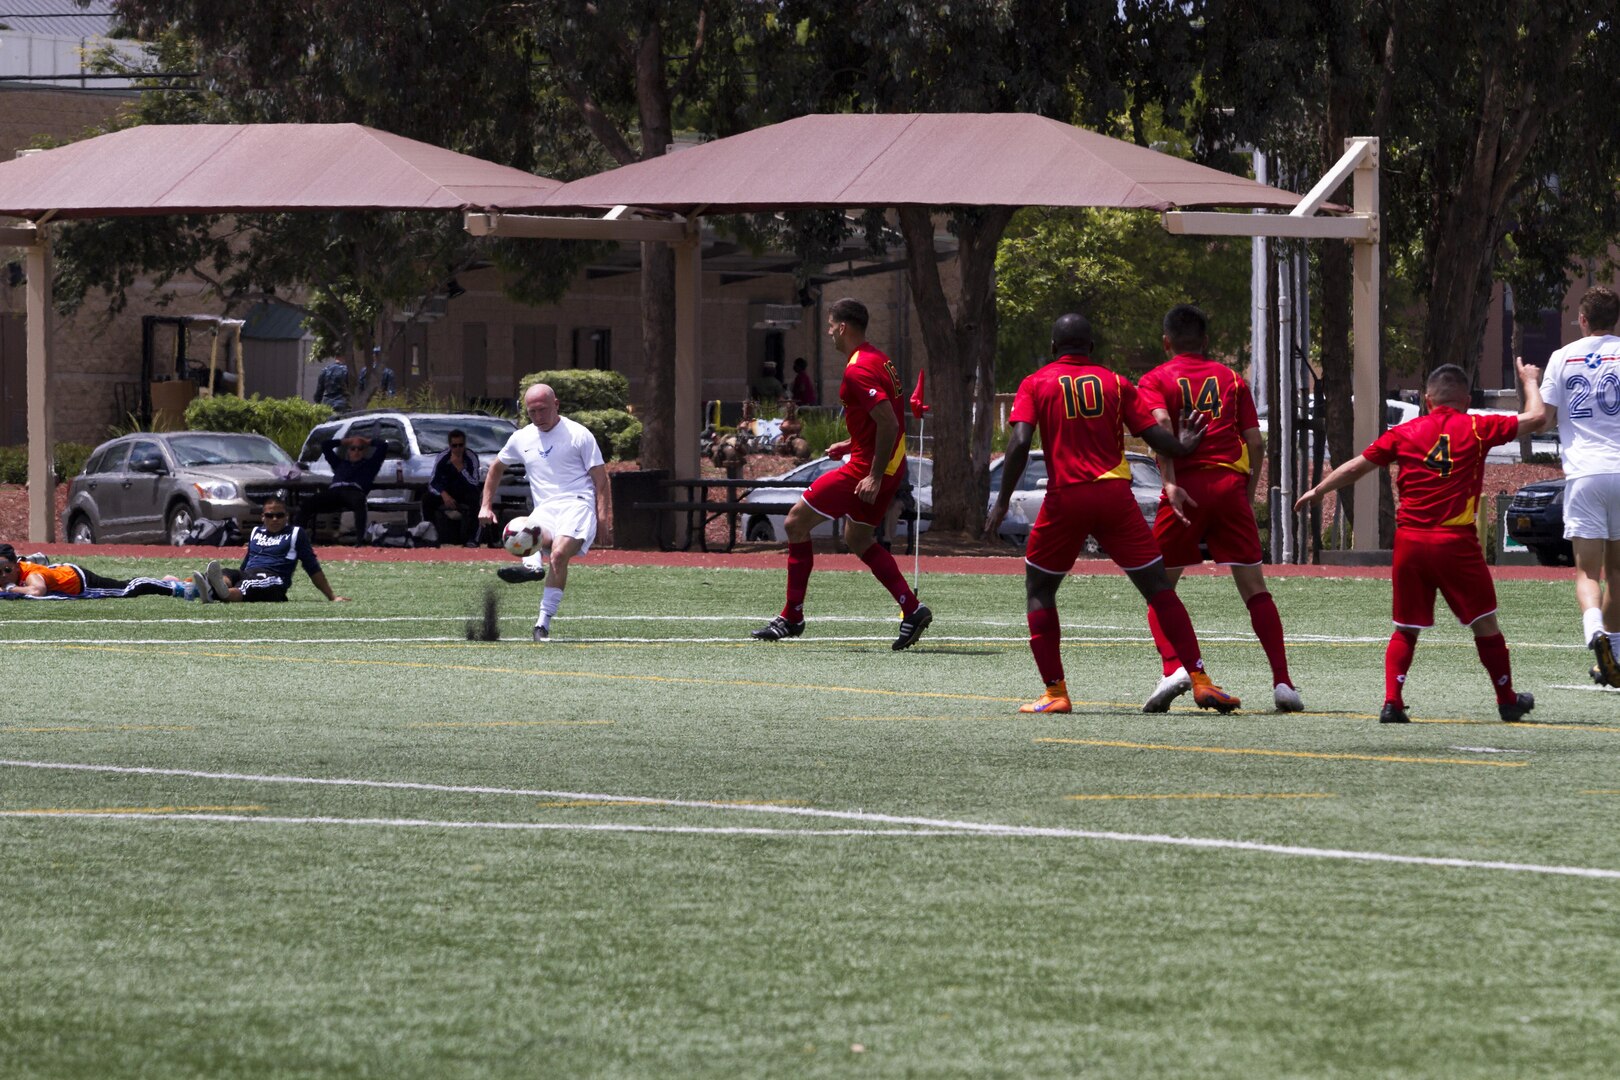 Members of the All-Marine soccer team prepare to defend against members of the Air Force soccer team May 18 during the 2015 Armed Forces Soccer Championship at Marine Corps Air Station Miramar, Calif. The final matches for the championship are slated for May 20.